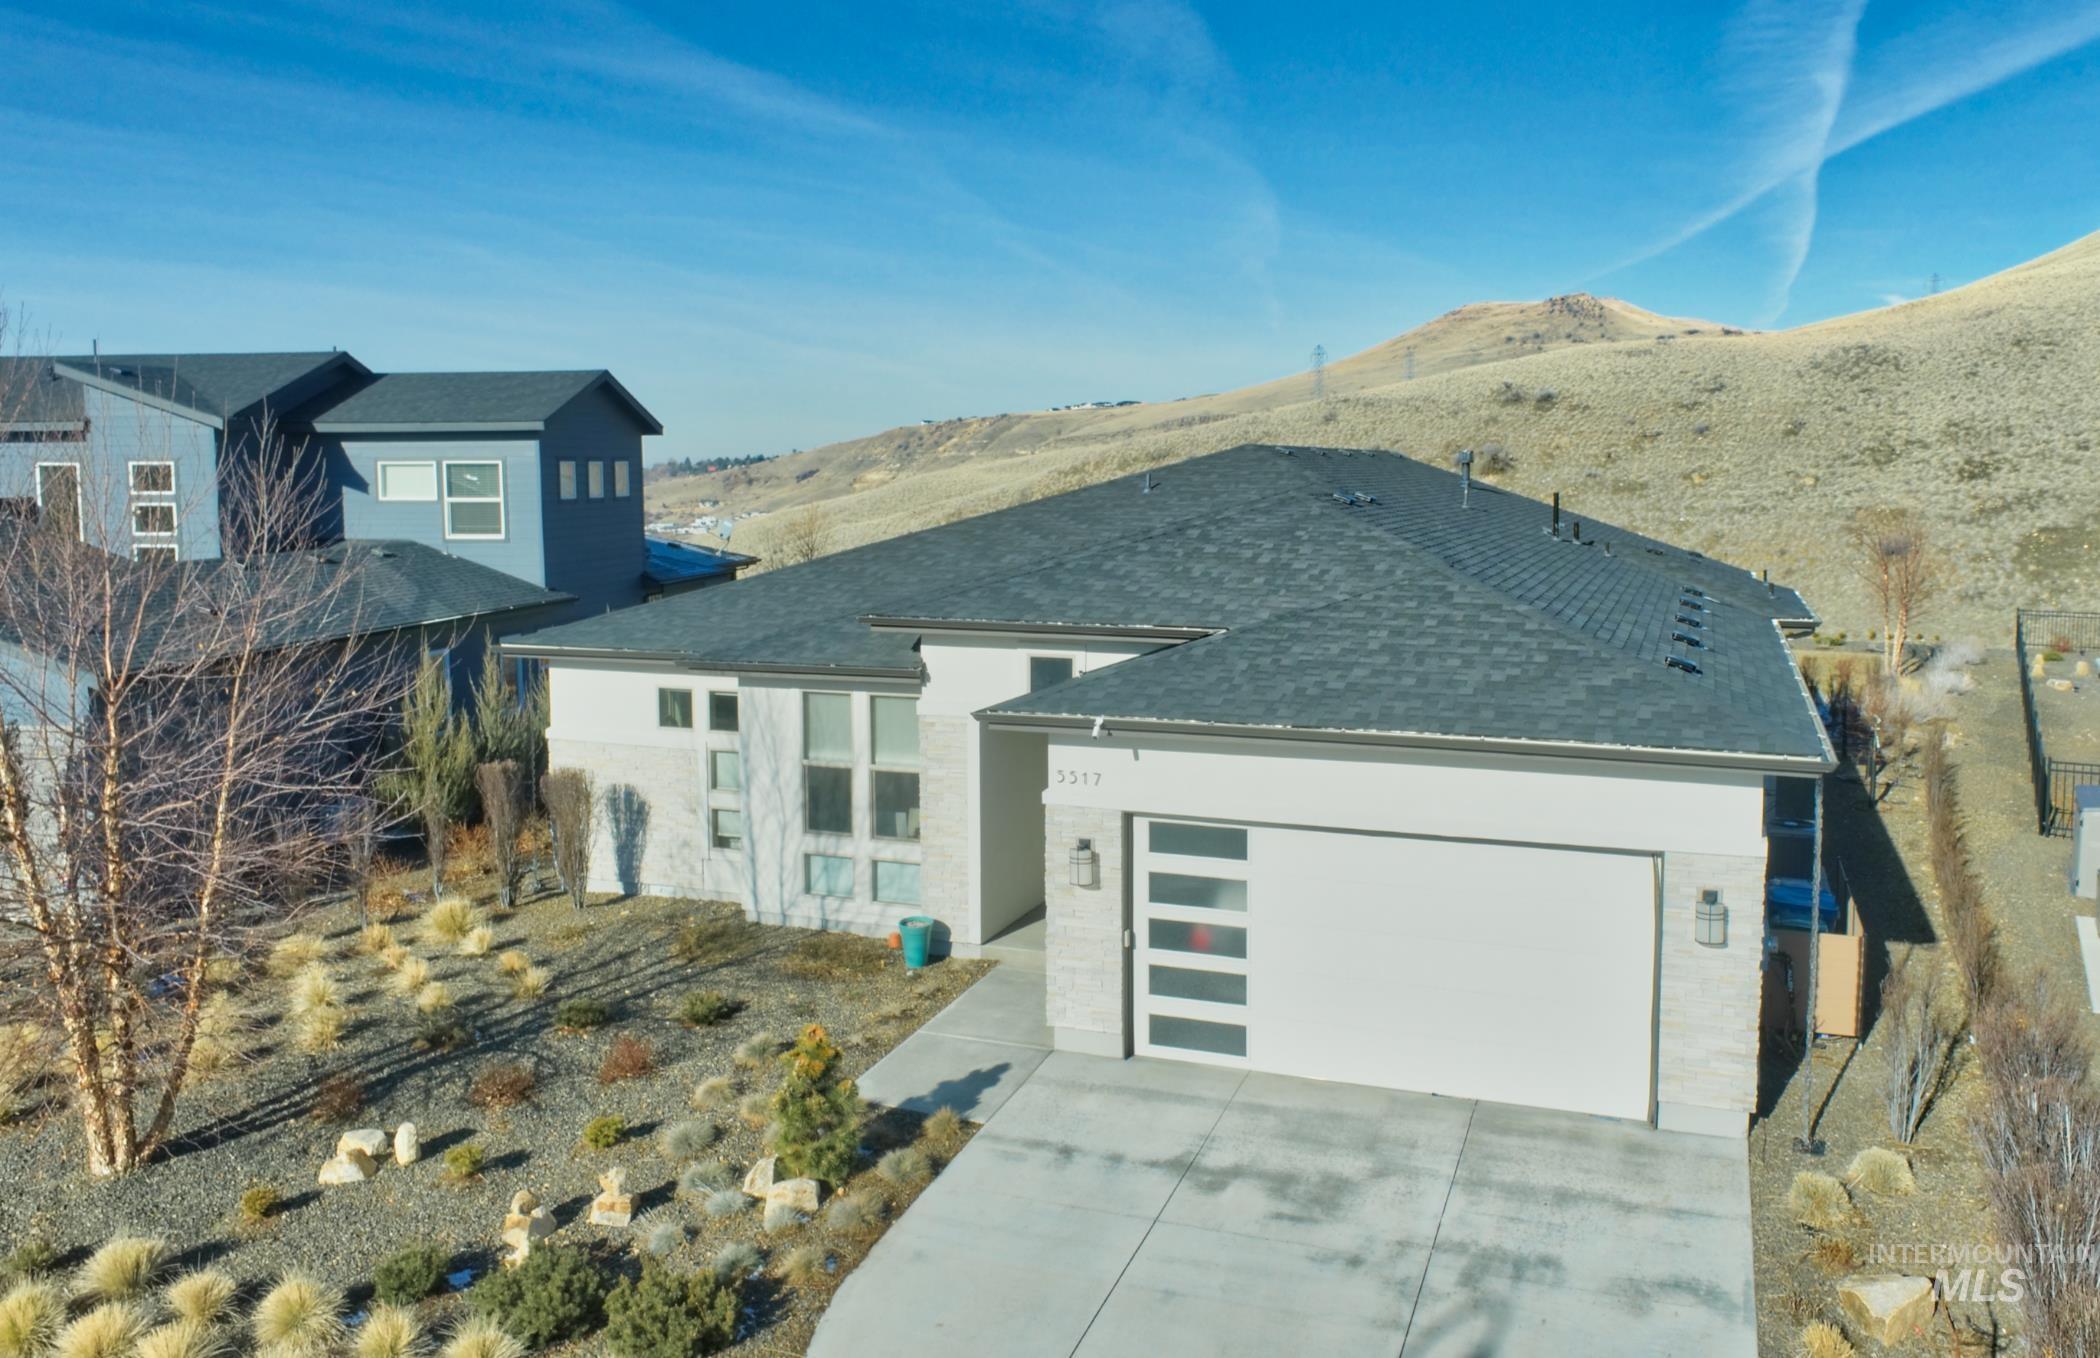 5517 E Hootowl Dr, Boise, Idaho 83716, 3 Bedrooms, 2.5 Bathrooms, Residential For Sale, Price $1,250,000, 98868635